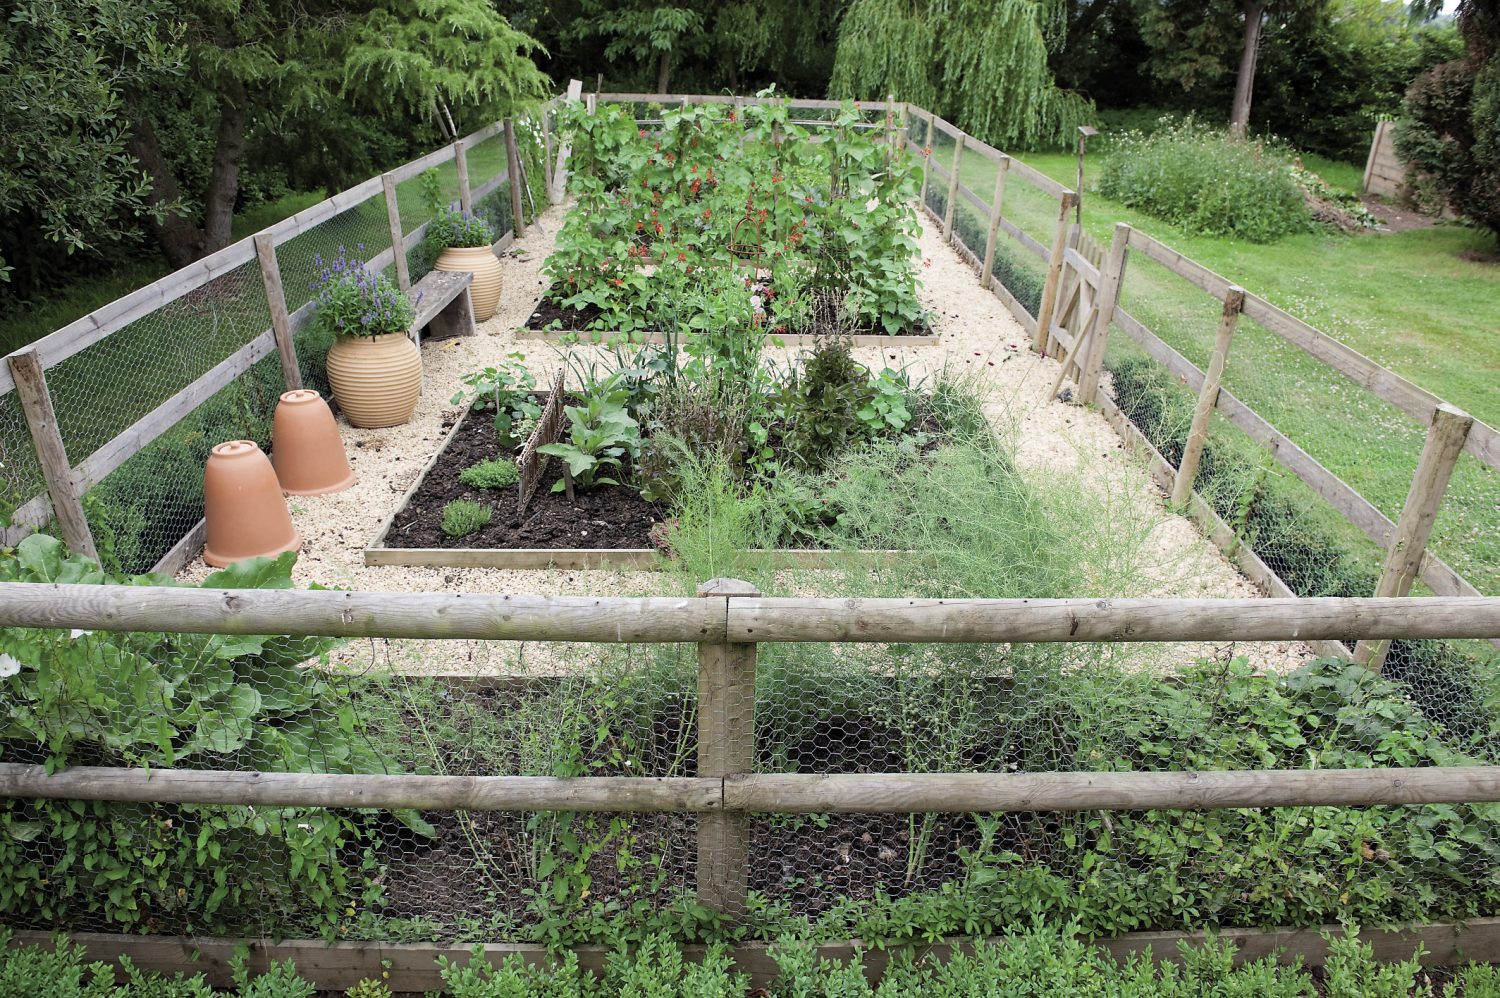 The busy vegetable patch, fenced against the voracious local bunnies, brims with produce